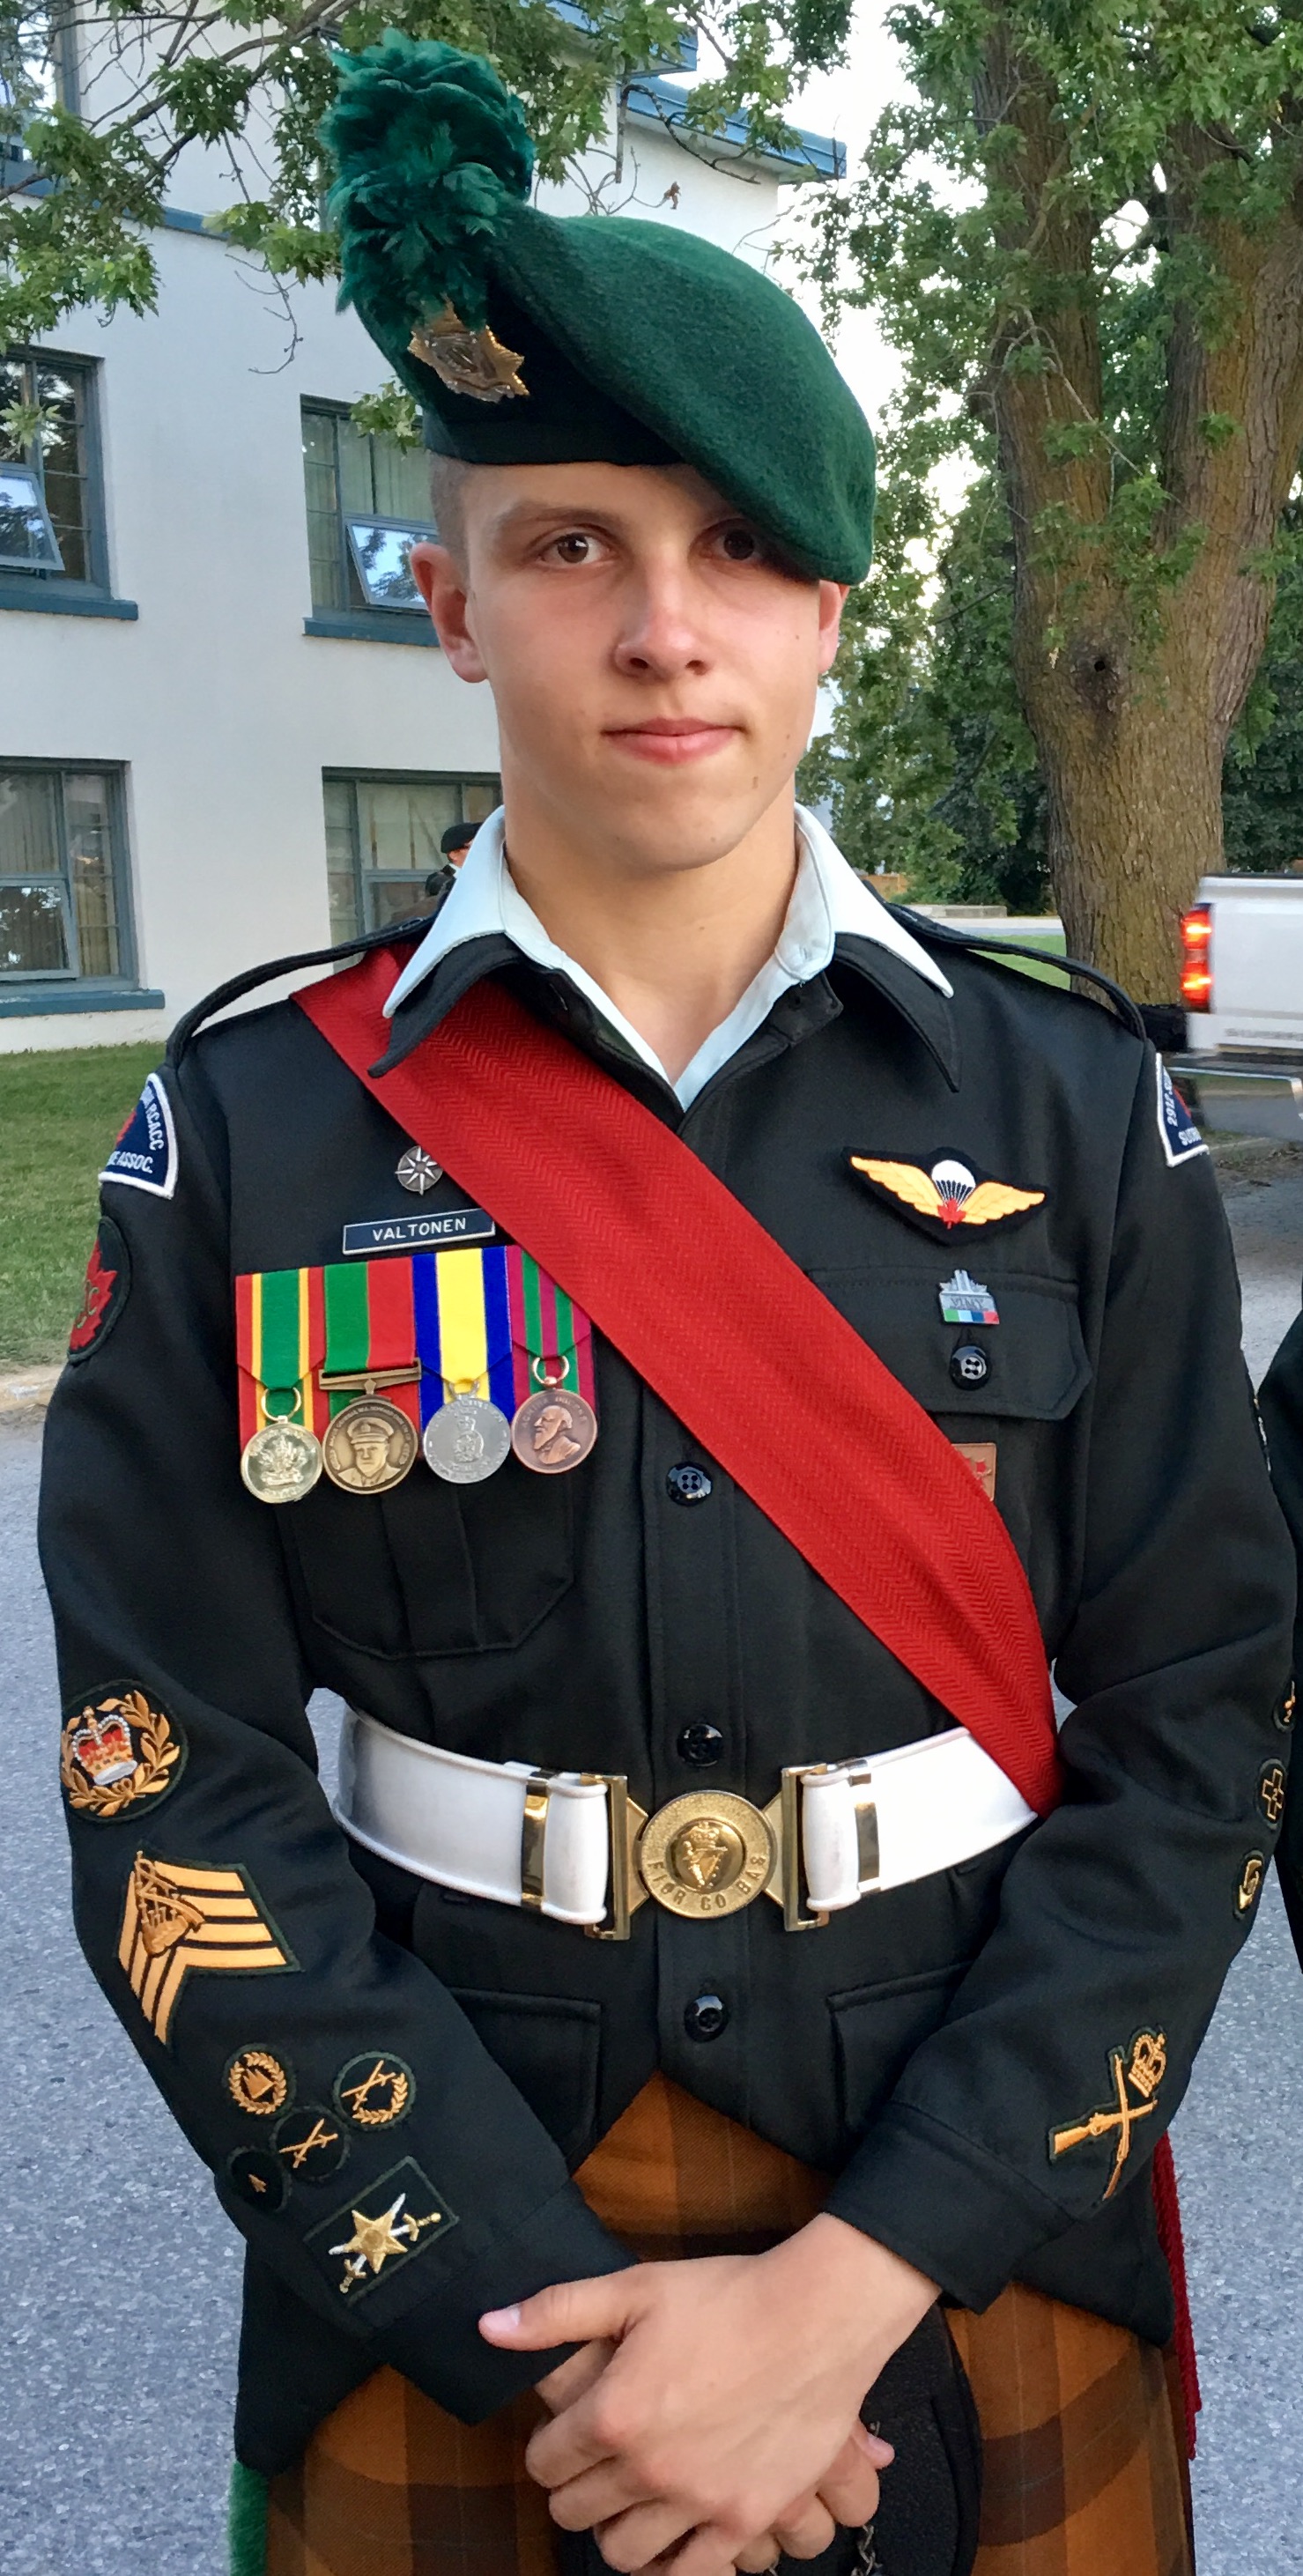 ONTARIO CADET NAMED CANADA’S MOST OUTSTANDING ARMY CADET – Army Cadet